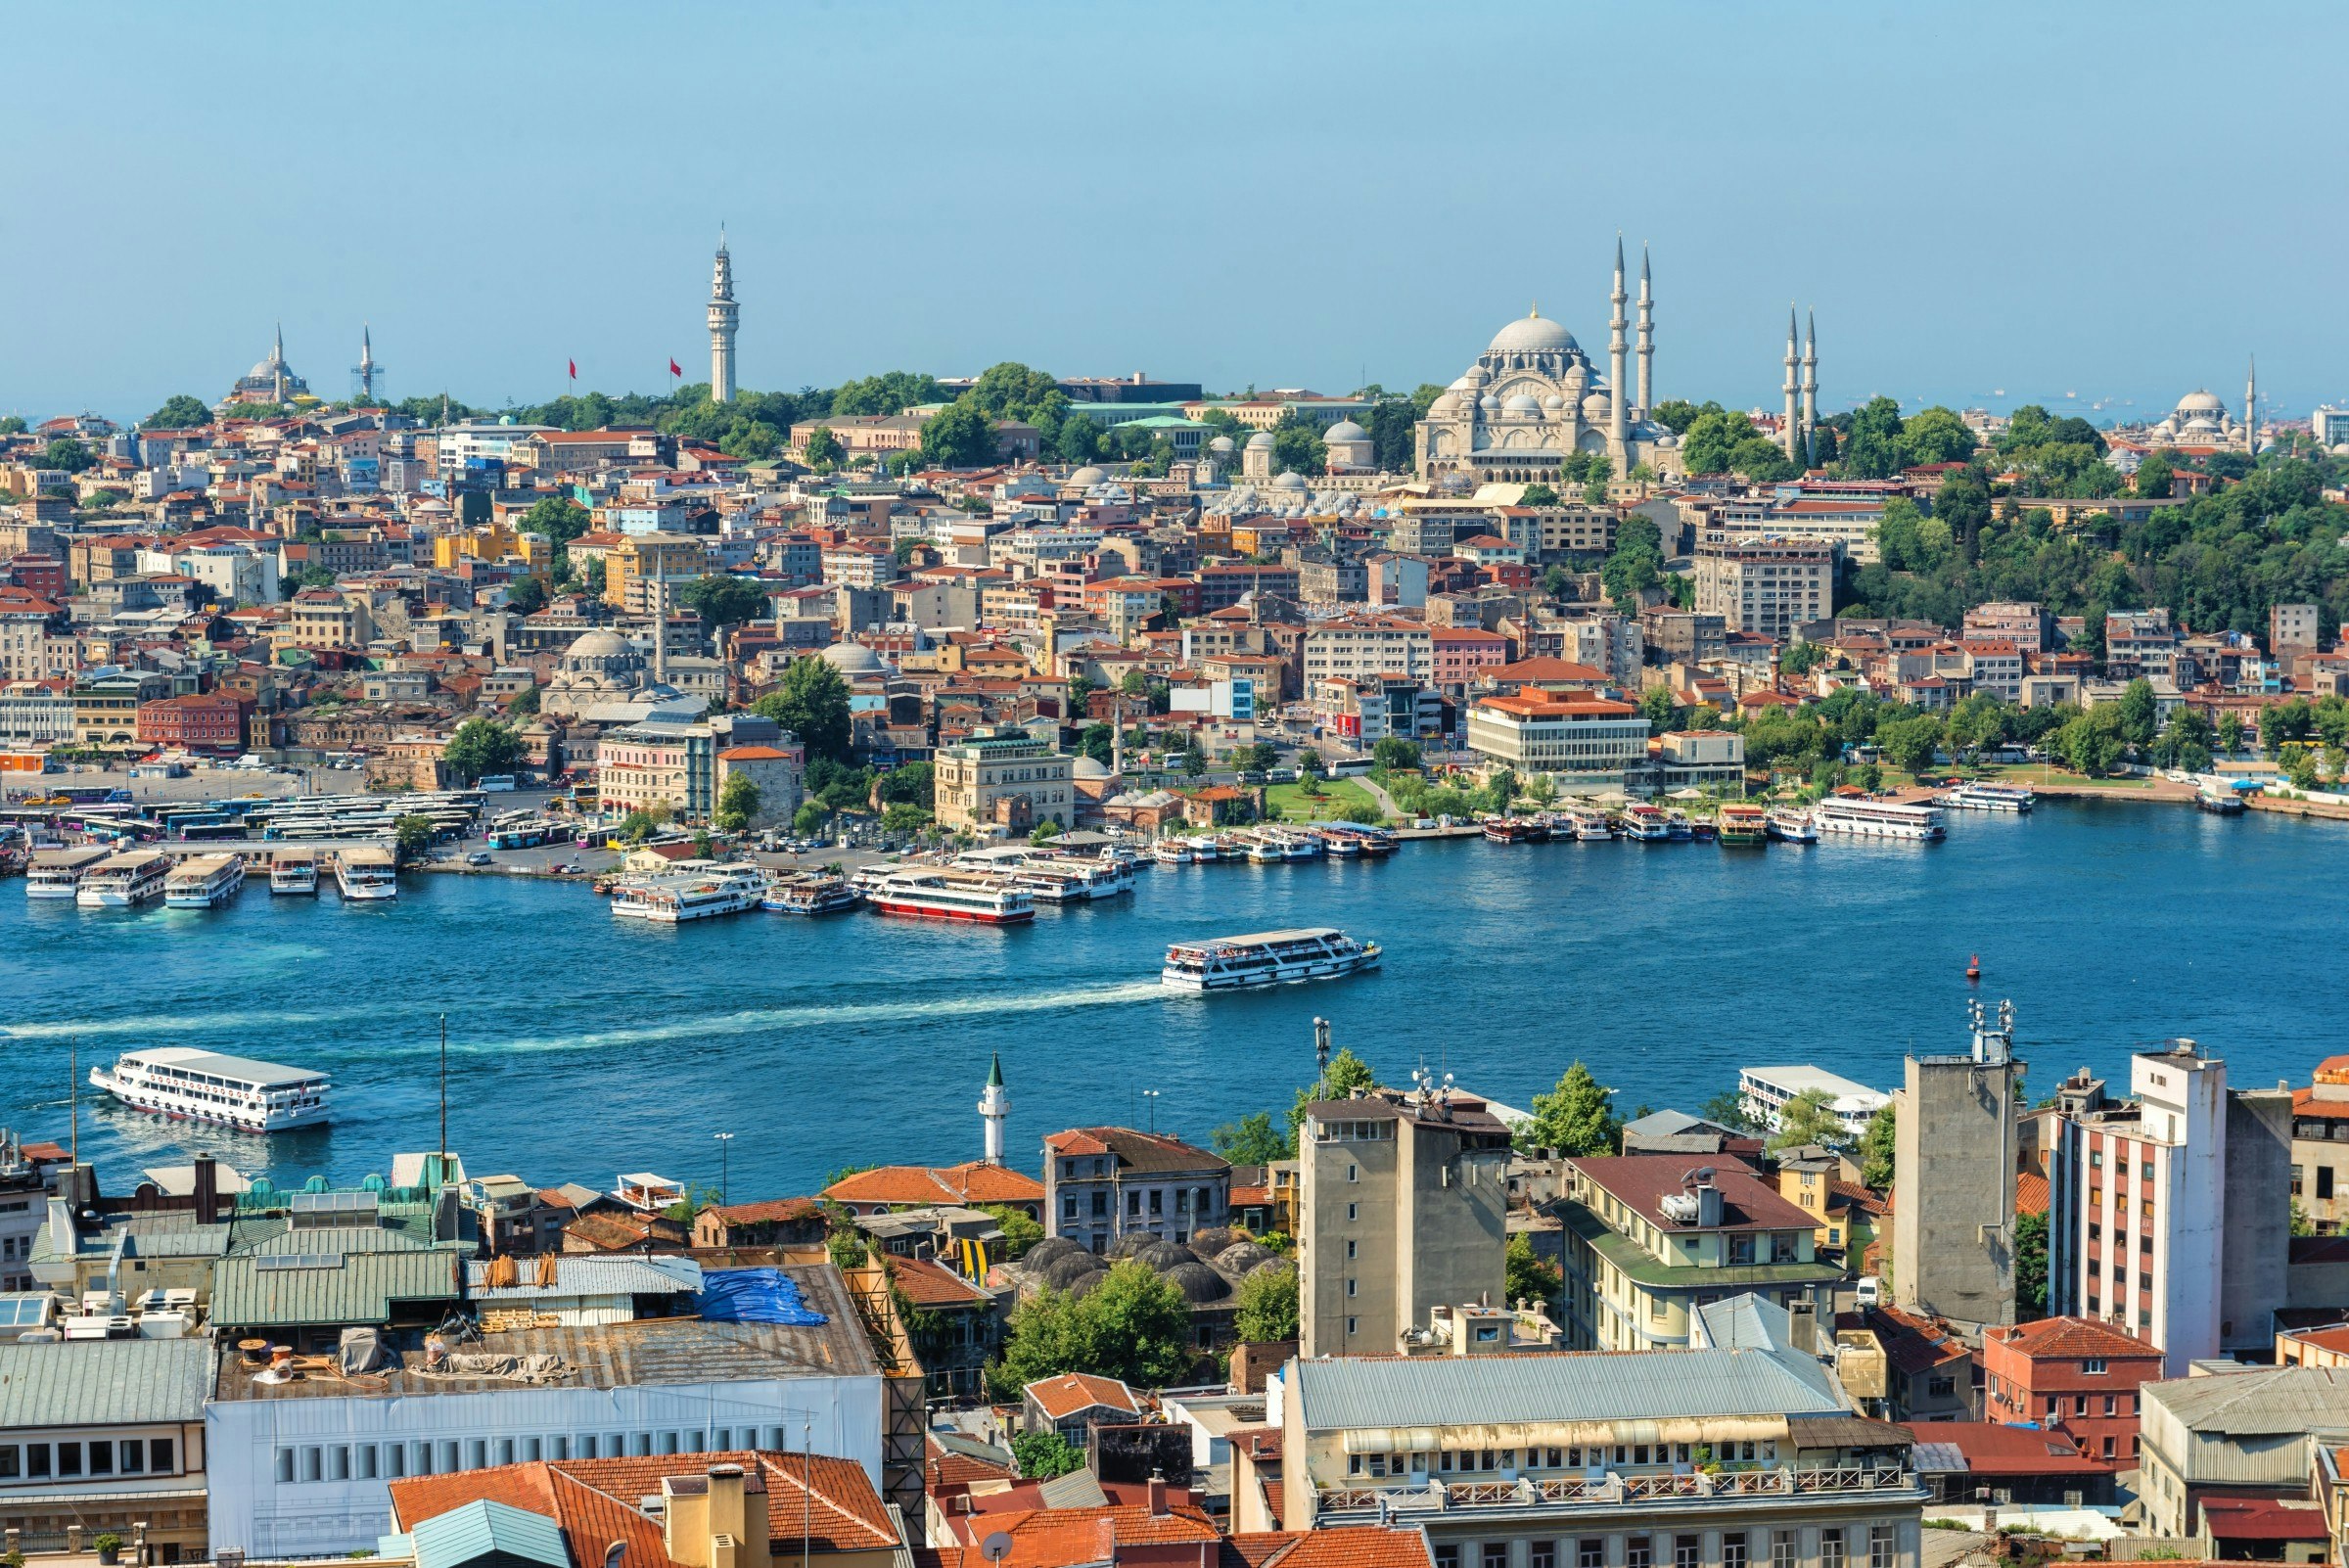 Ferry ships sail up and down the Golden Horn in Istanbul